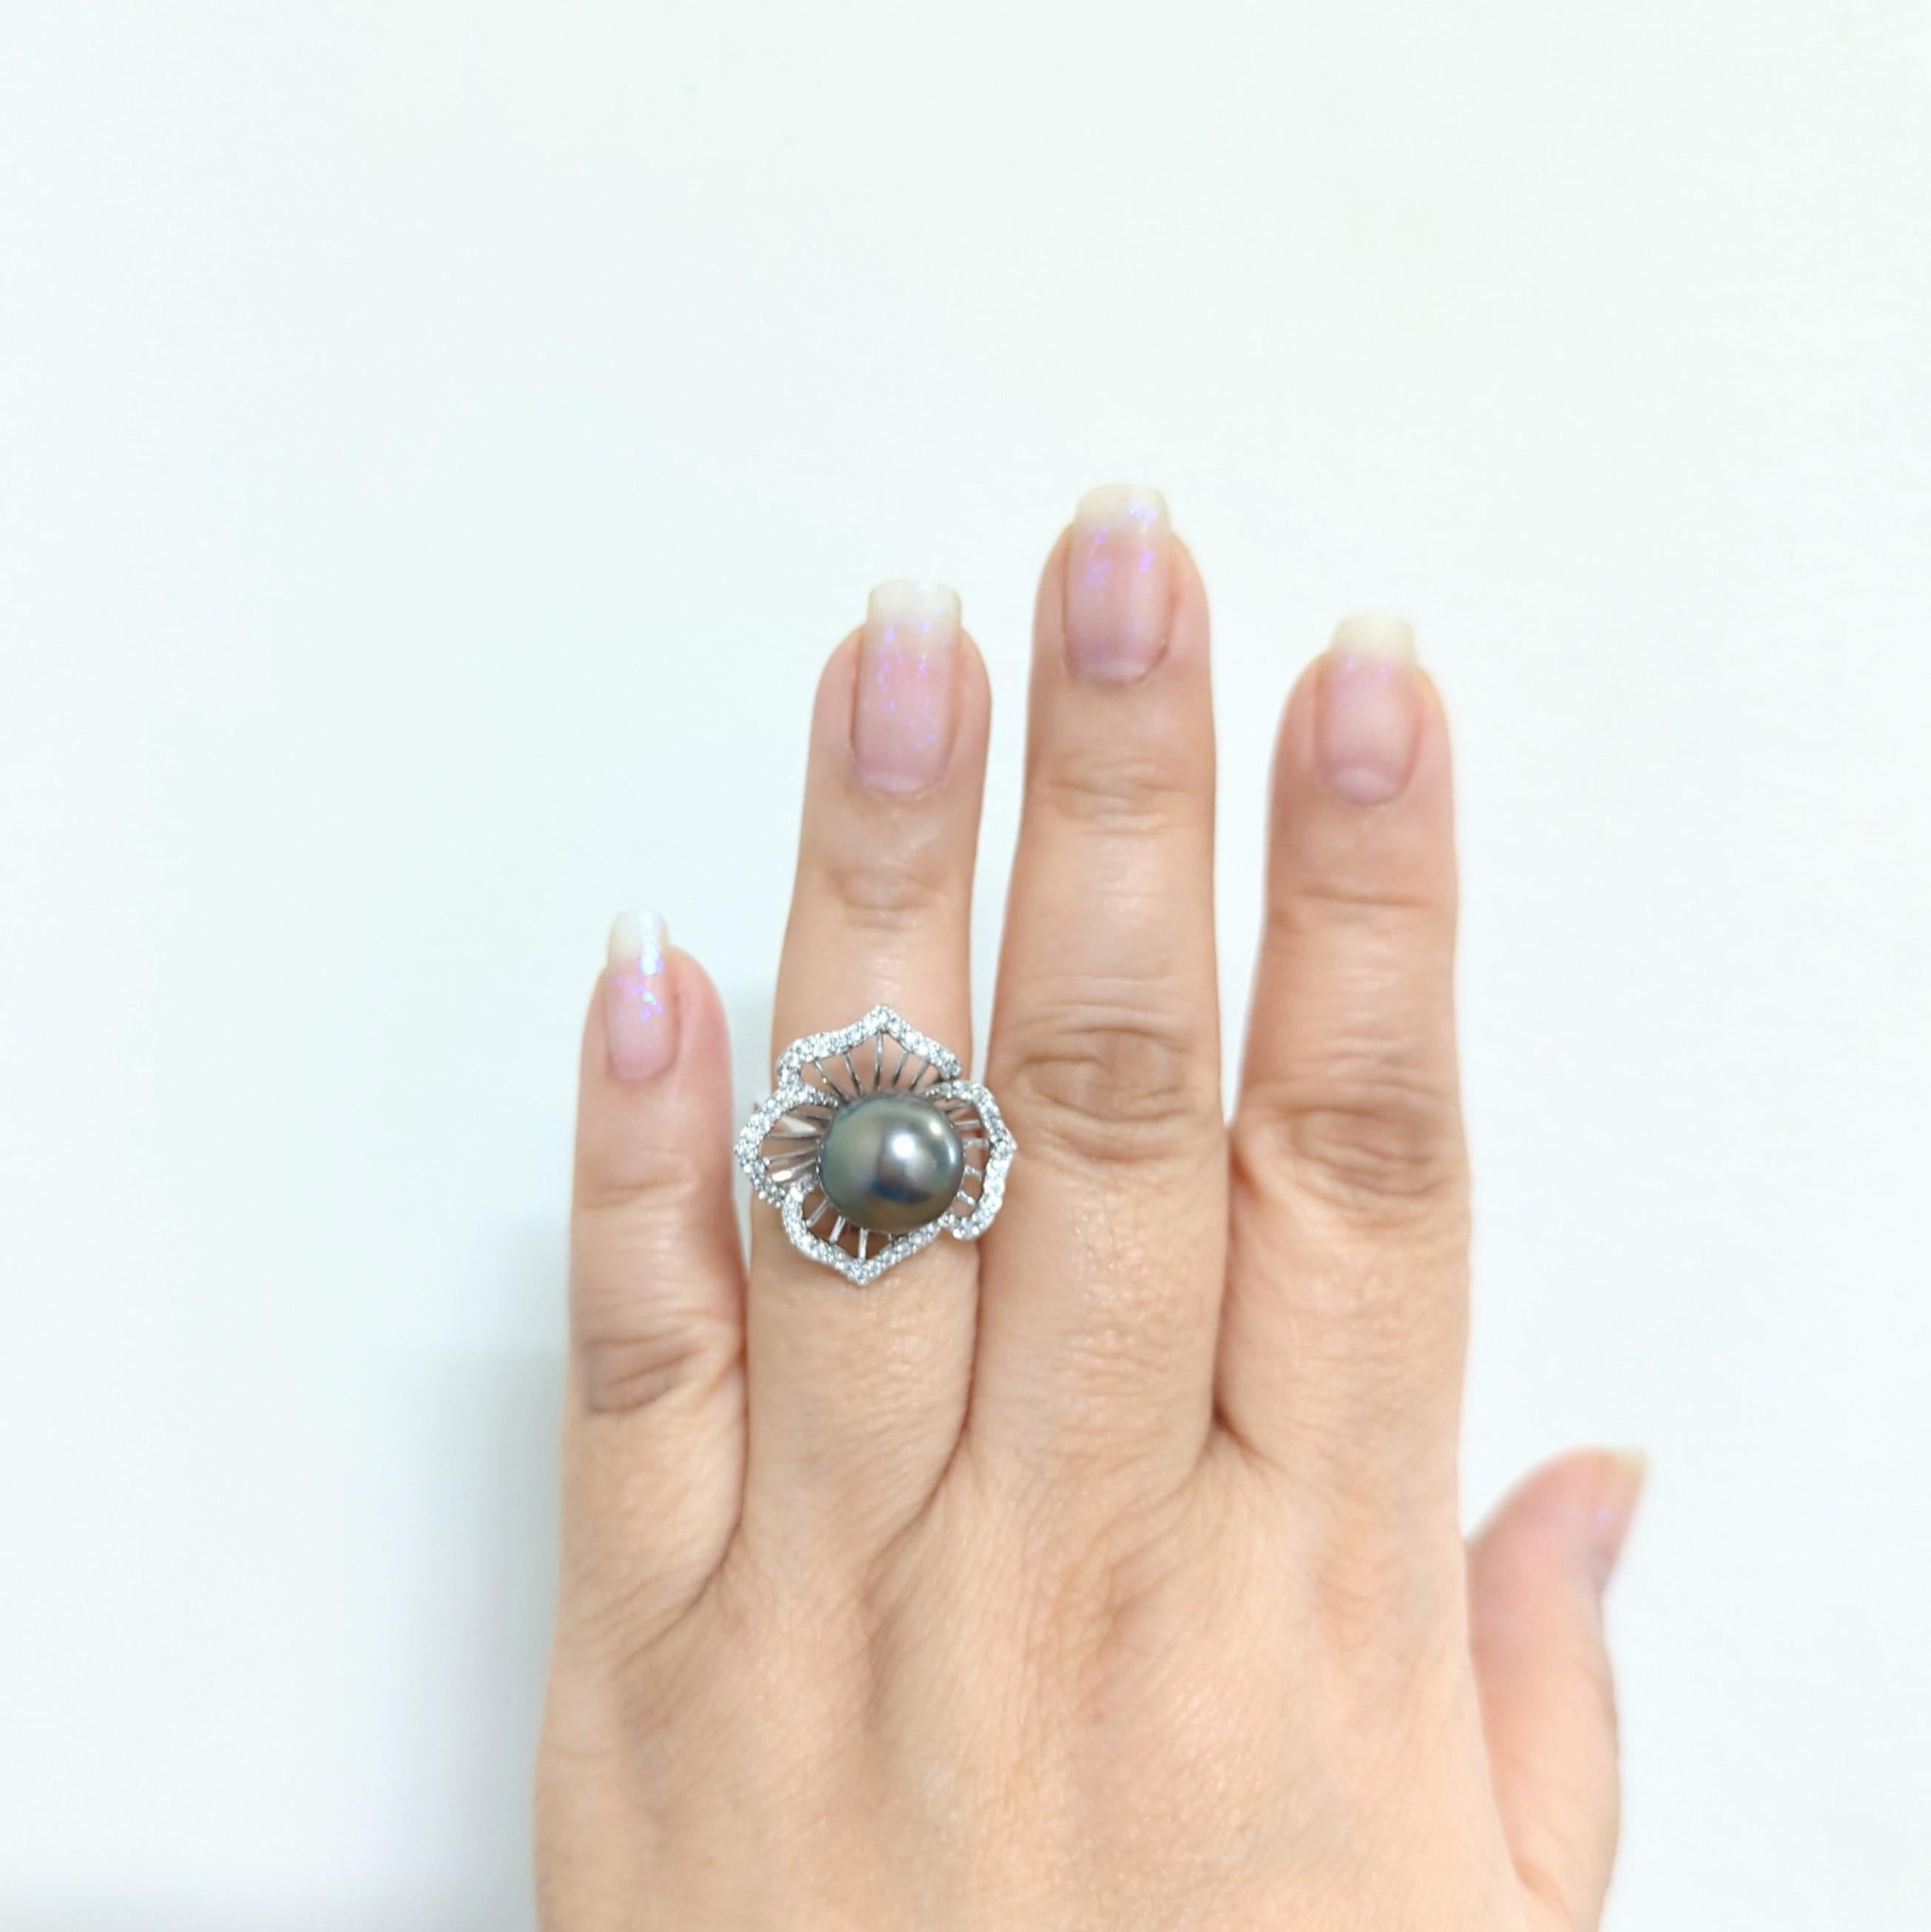 Beautiful big black Tahitian round pearl with good quality white diamond rounds.  Handmade in 18k white gold.  Ring size 6.5.